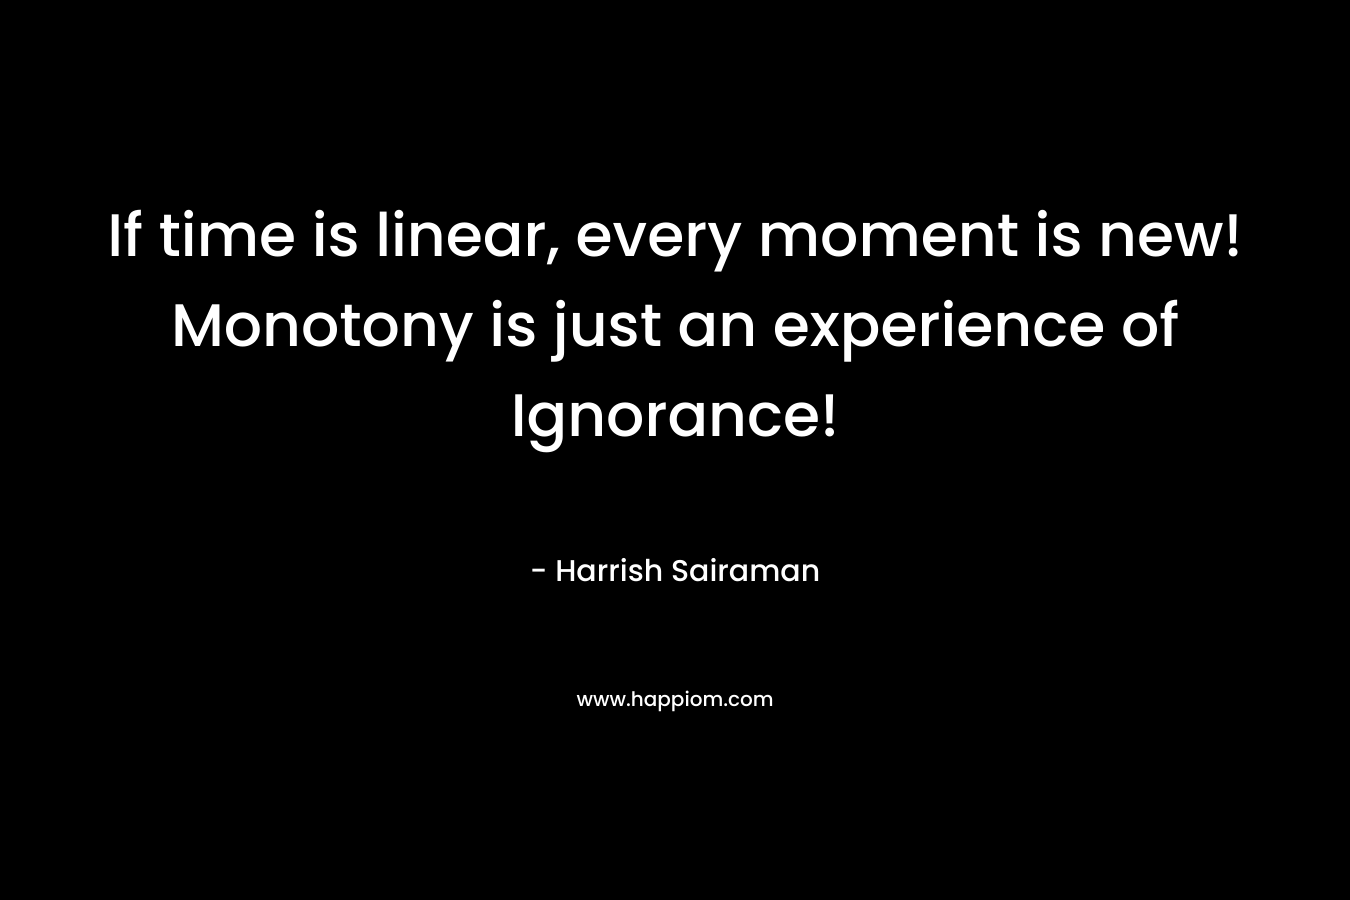 If time is linear, every moment is new! Monotony is just an experience of Ignorance! – Harrish Sairaman